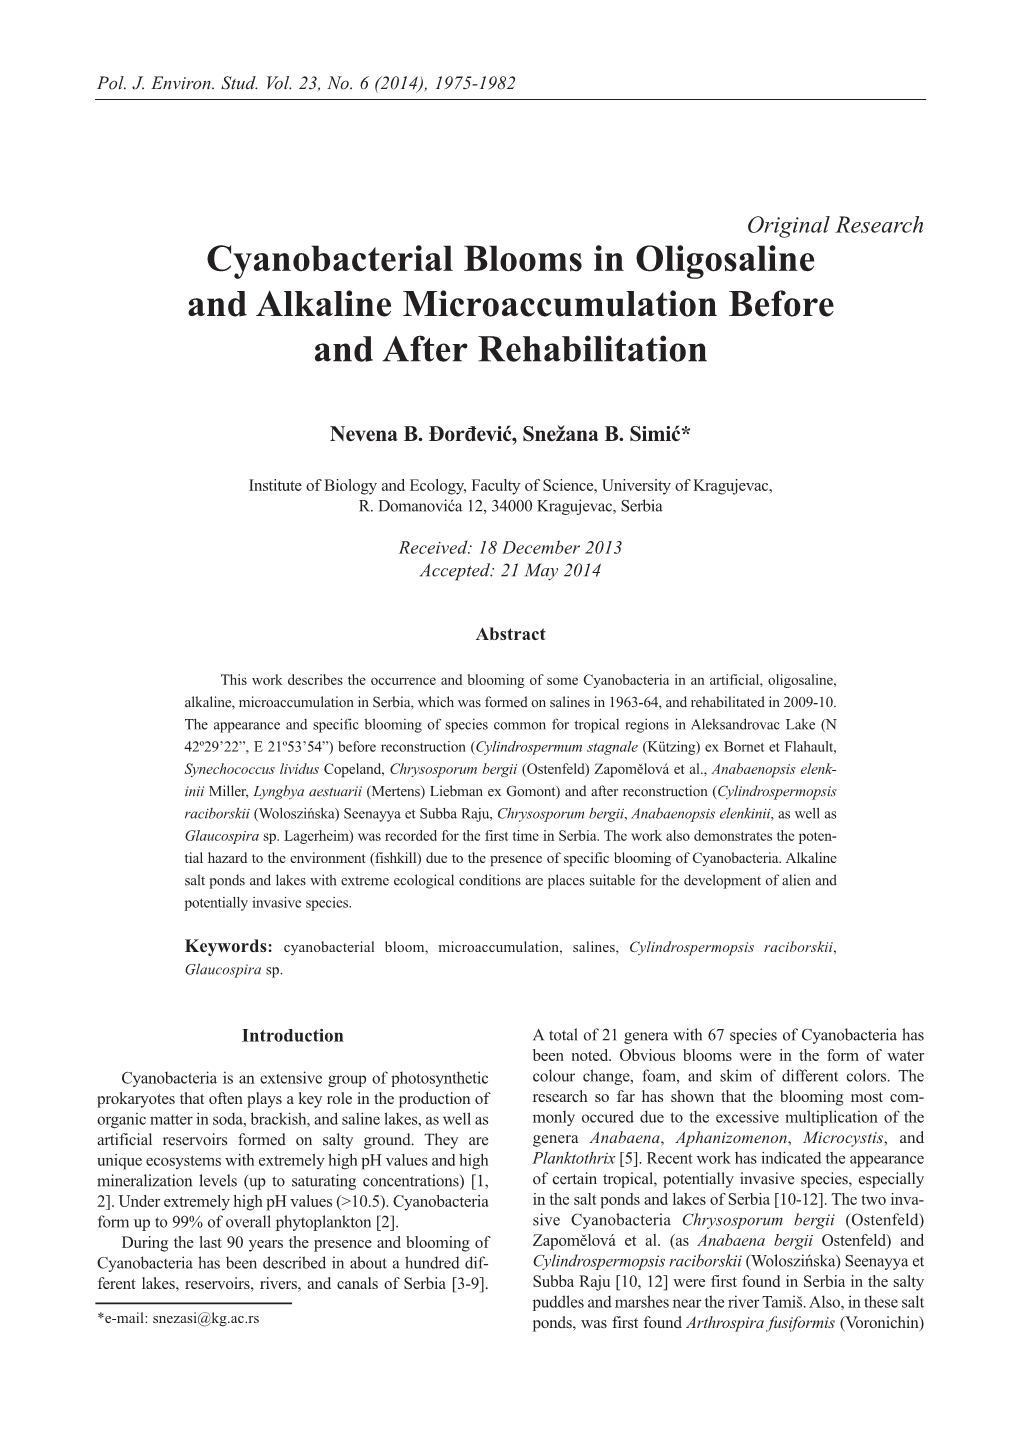 Cyanobacterial Blooms in Oligosaline and Alkaline Microaccumulation Before and After Rehabilitation